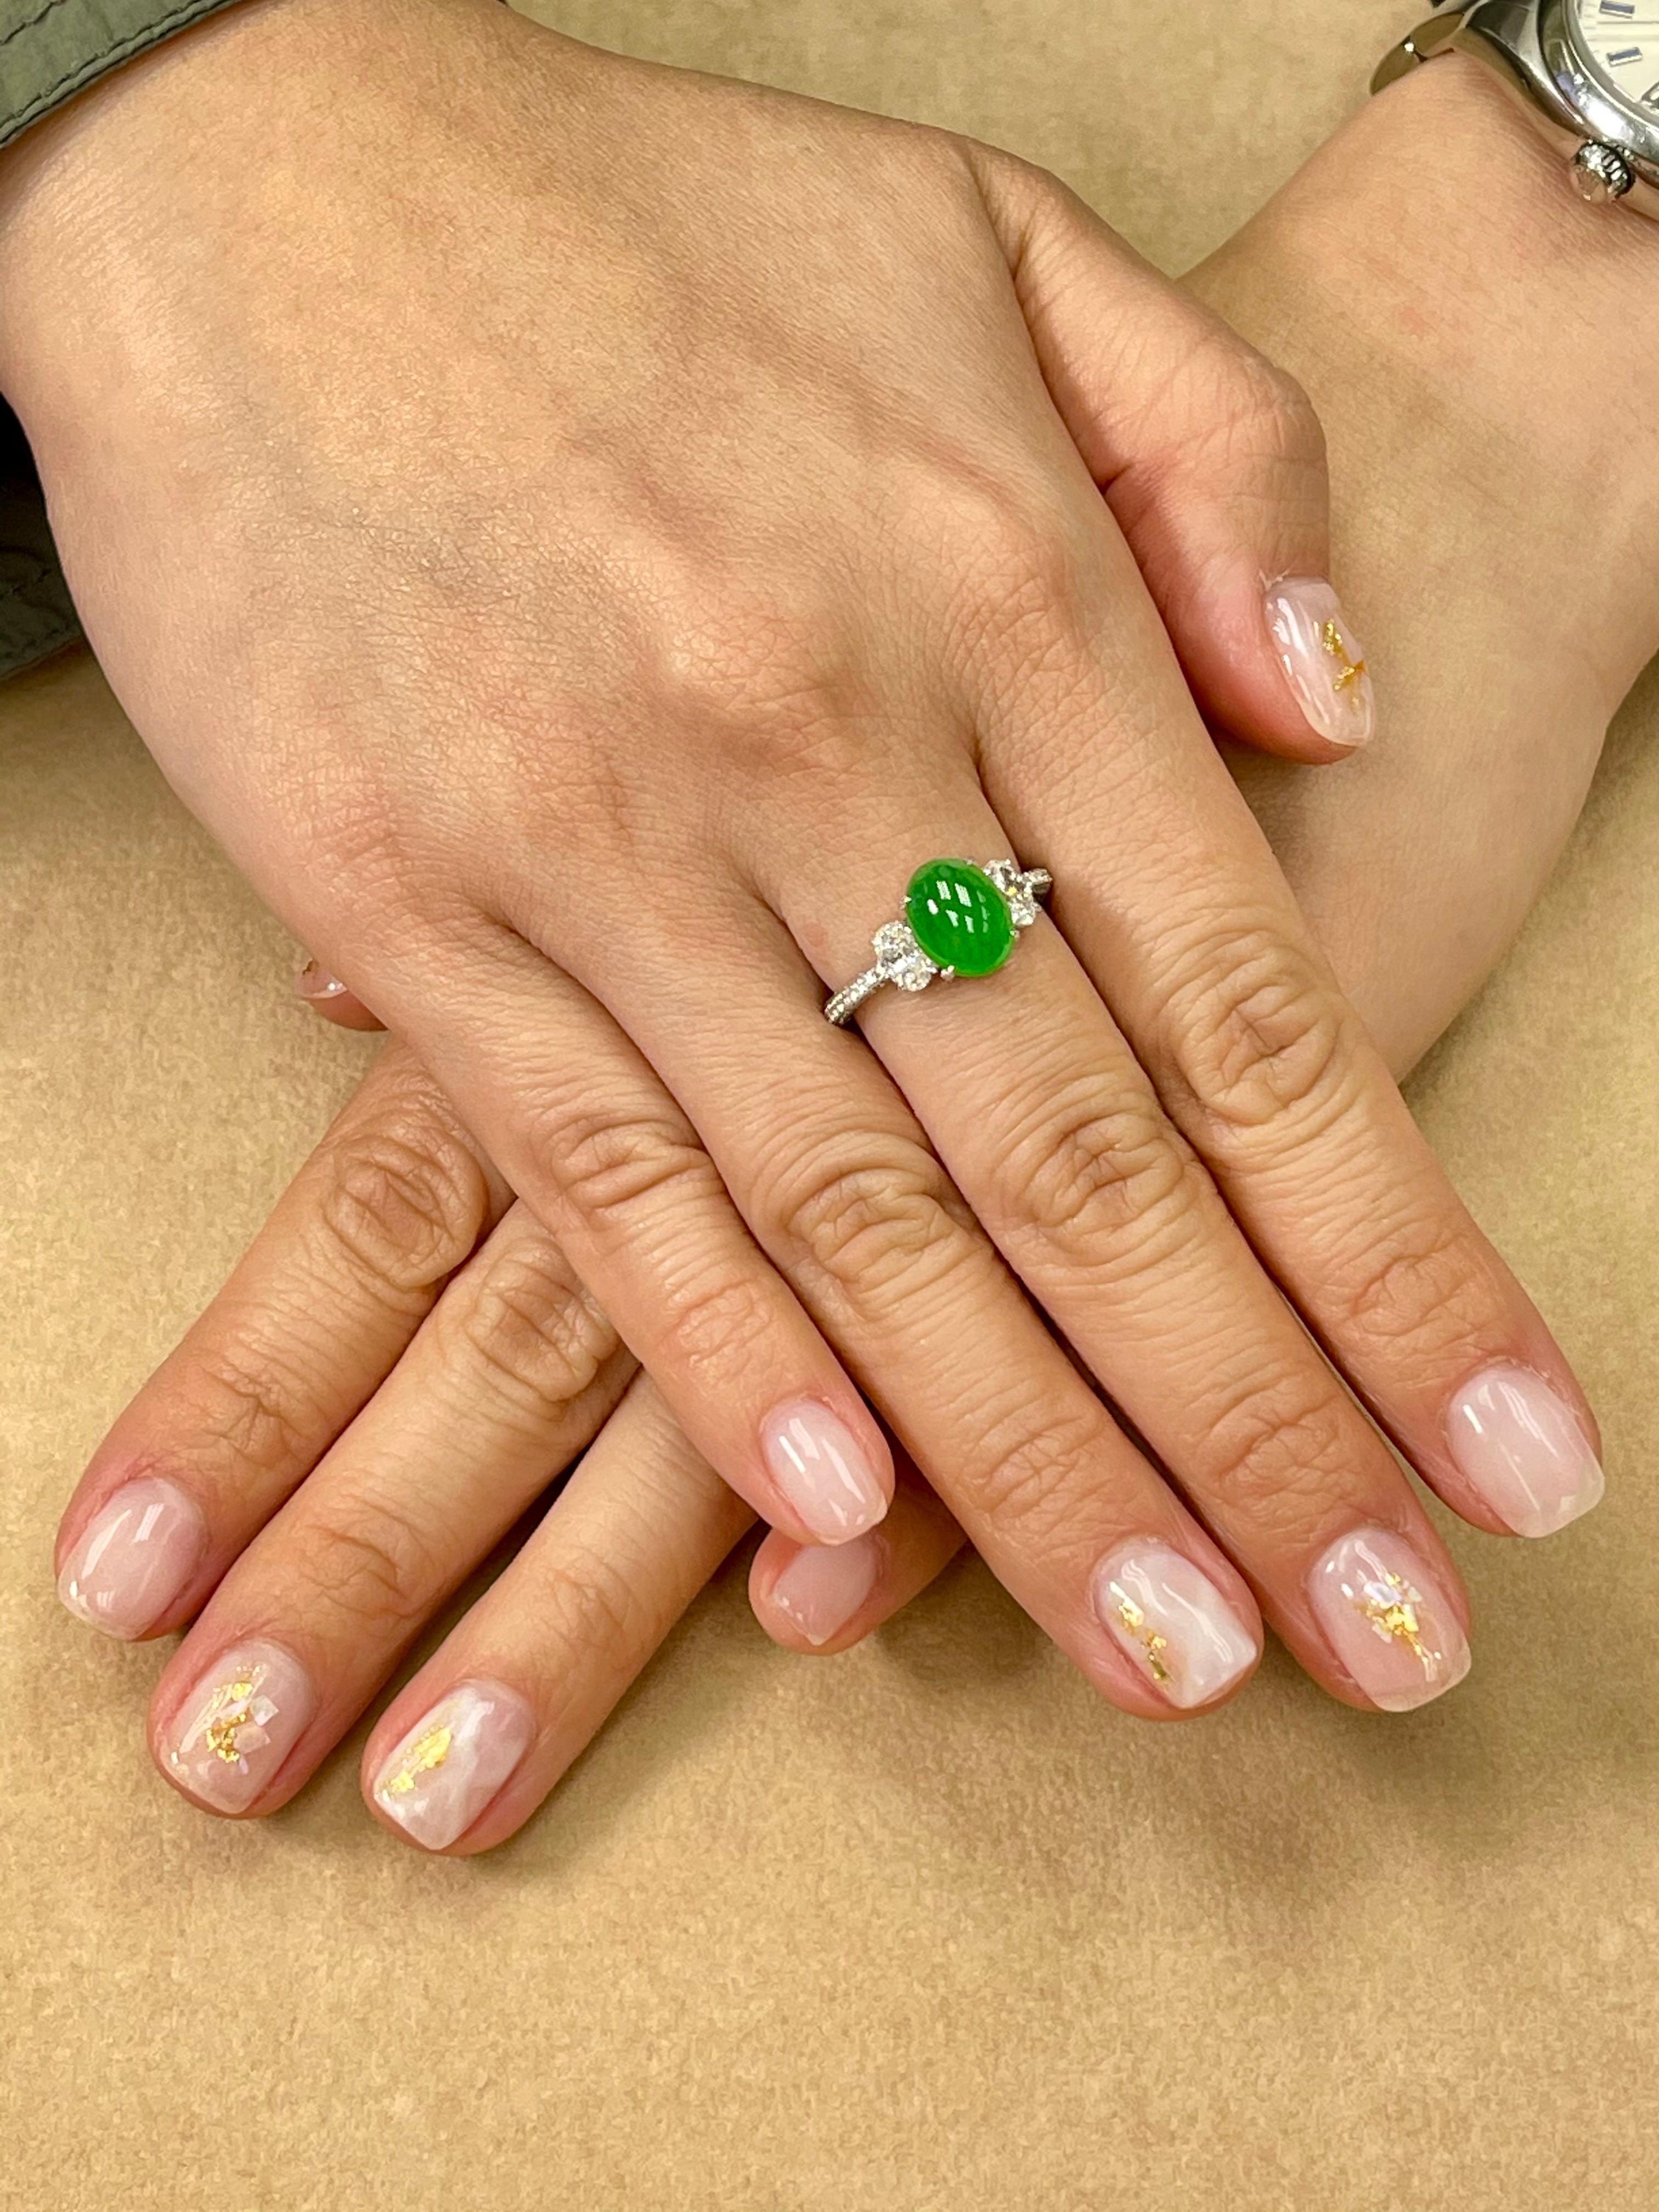 Please check out the HD Video! Here is an apple green Jade and diamond ring. It is certified natural jadeite jade. The ring is set in 18k white gold and diamonds. There are 2 Oval diamonds that are on each side of the jade center stone. Each oval